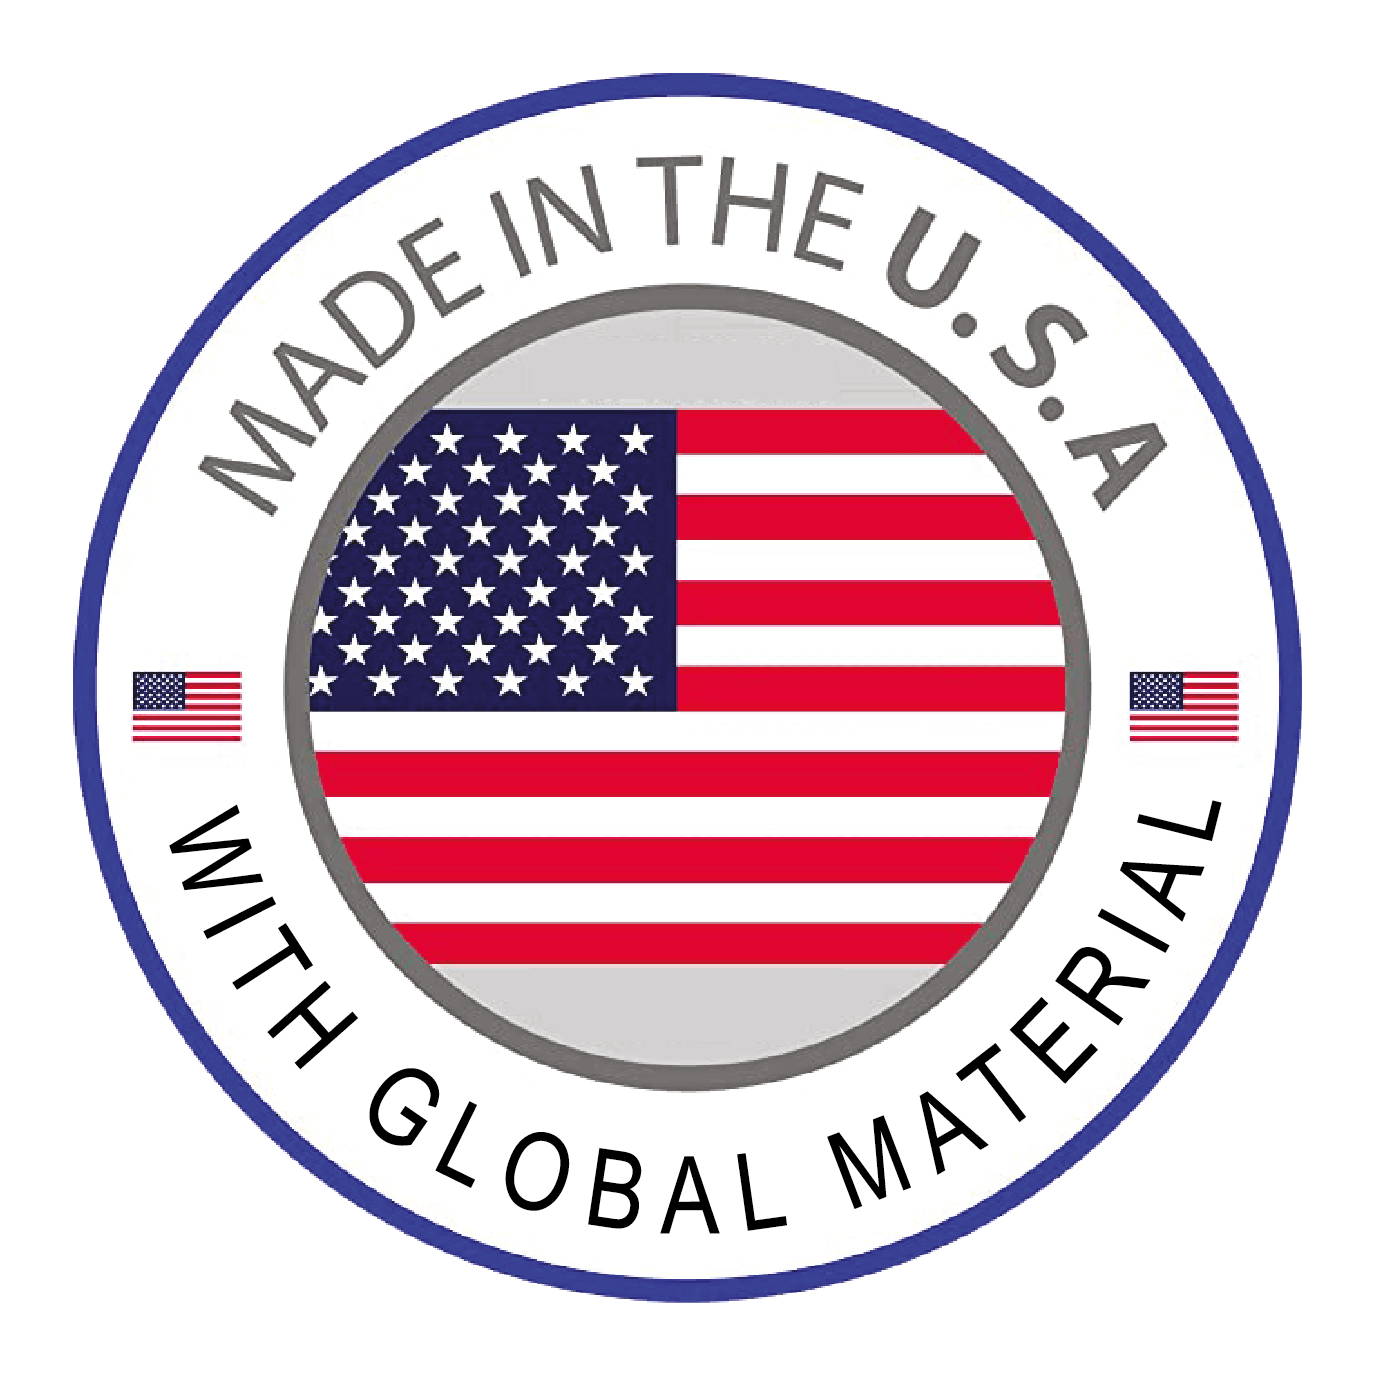 Made in usa with worldwide material icon 